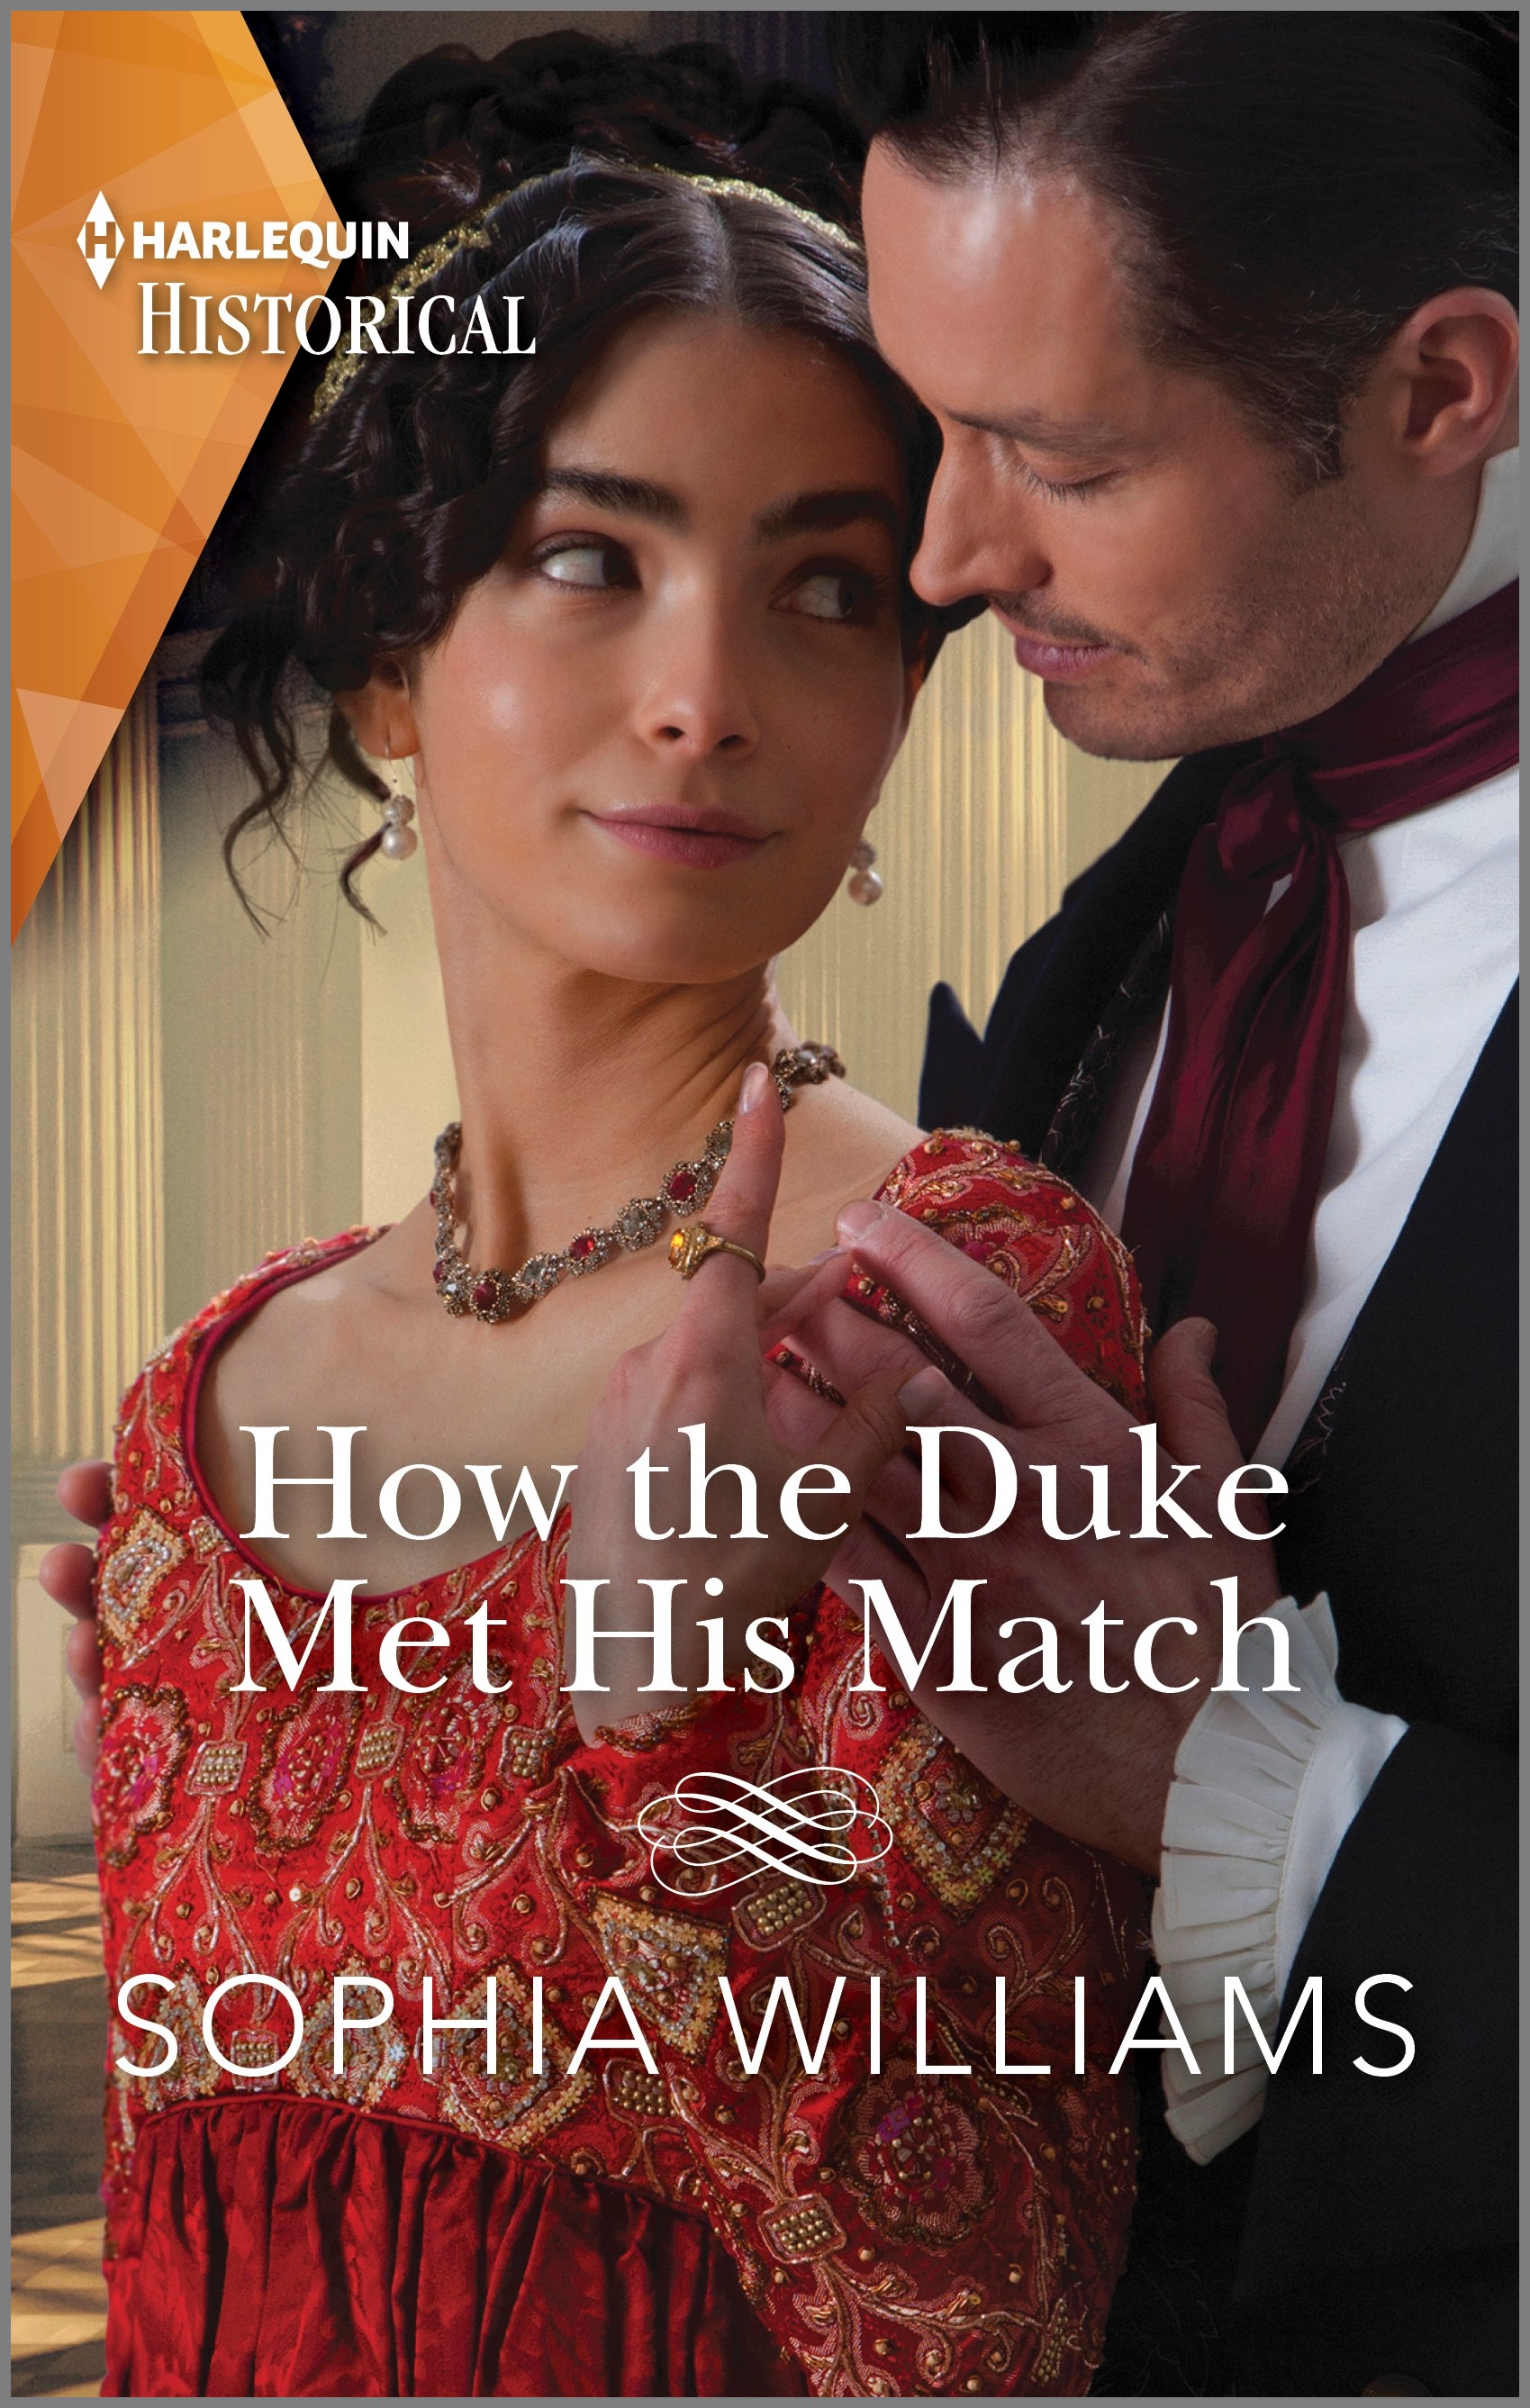 How the Duke Met His Match by Sophia Williams